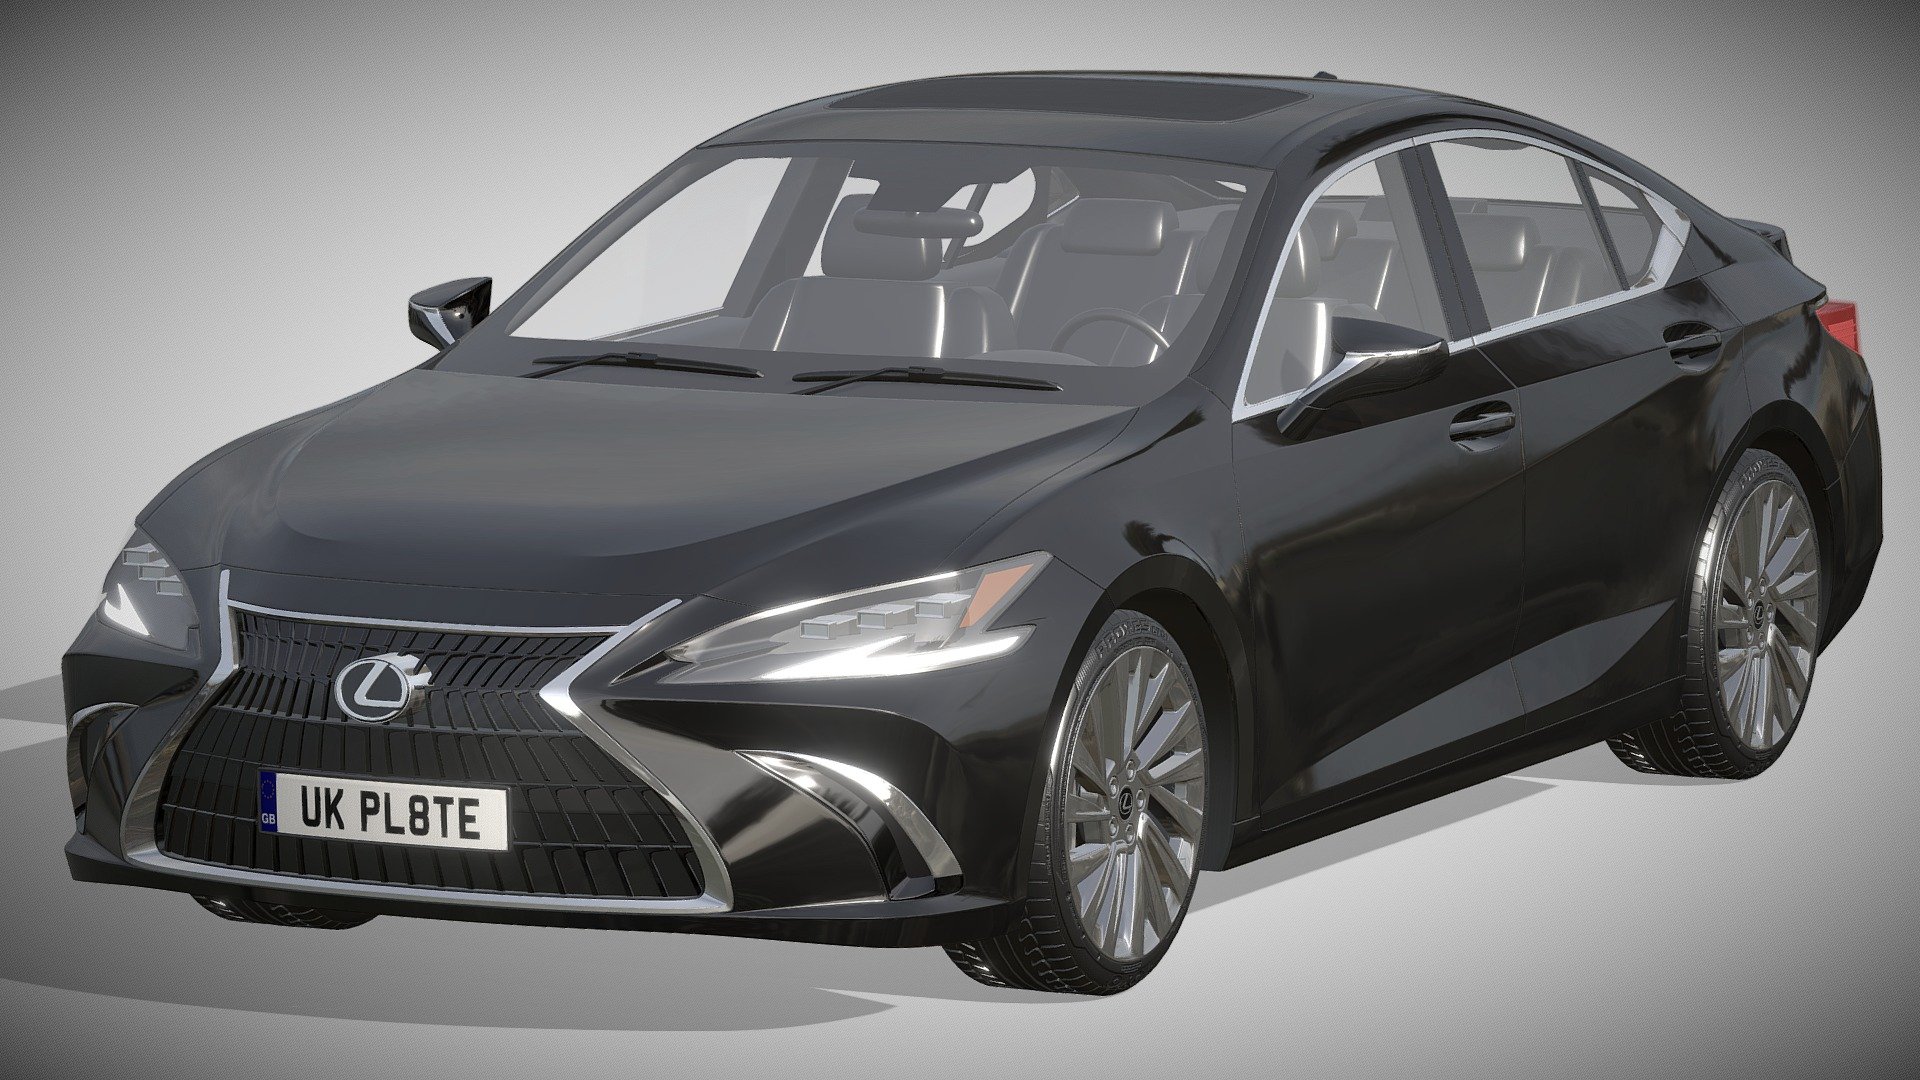 Lexus ES 2022

https://www.lexus.com/models/ES

Clean geometry Light weight model, yet completely detailed for HI-Res renders. Use for movies, Advertisements or games

Corona render and materials

All textures include in *.rar files

Lighting setup is not included in the file! - Lexus ES 2022 - Buy Royalty Free 3D model by zifir3d 3d model